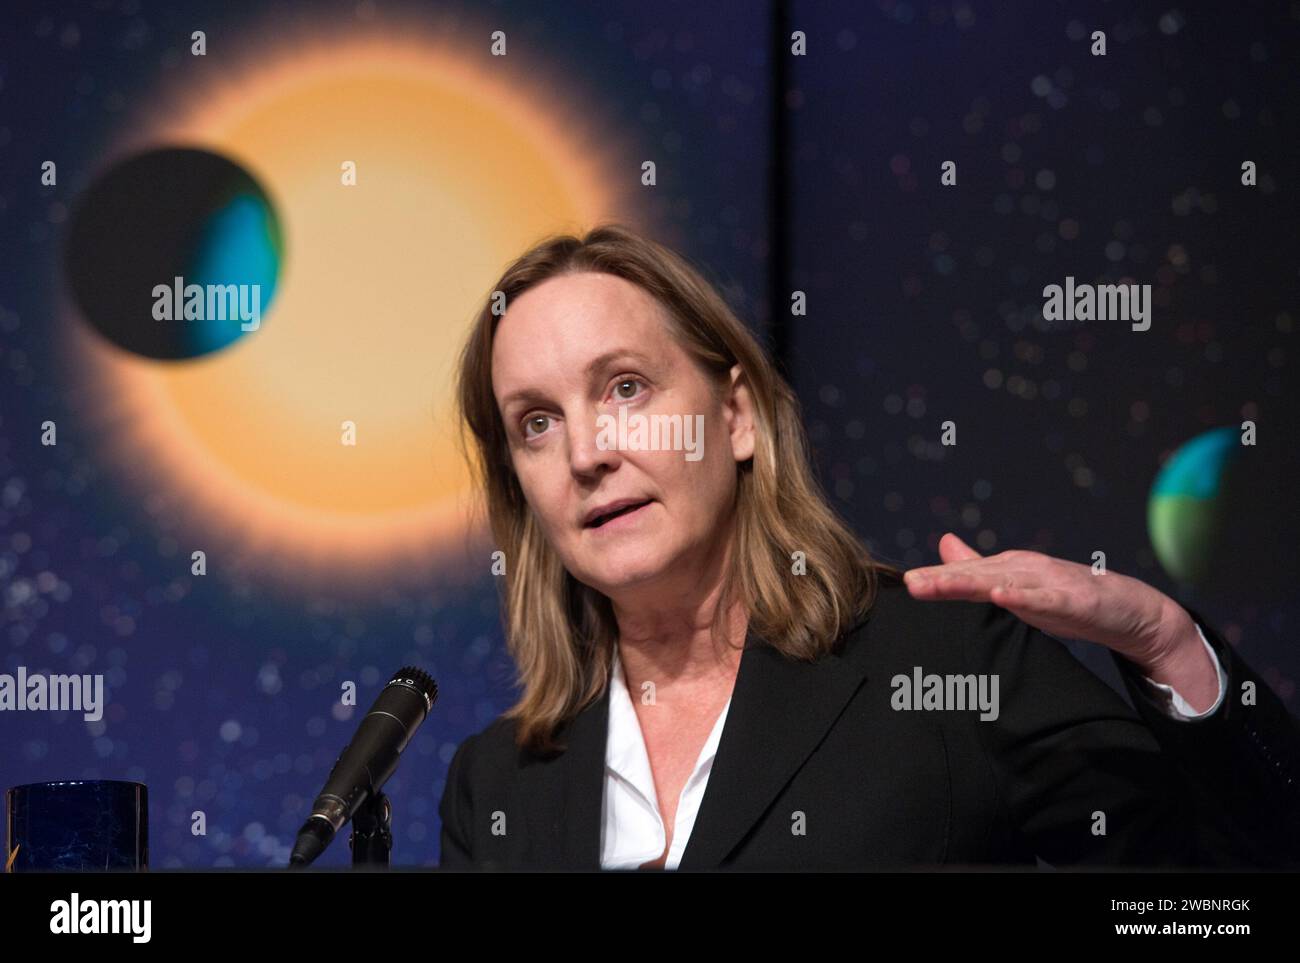 Debra Fischer, a professor of Astronomy at Yale University, speaks during a news conference, Wednesday, Feb. 2, 2010, at NASA Headquarters in Washington. Scientists using NASA's Kepler, a space telescope, recently discovered six planets made of a mix of rock and gases orbiting a single sun-like star, known as Kepler-11, which is located approximately 2,000 light years from Earth. Stock Photo